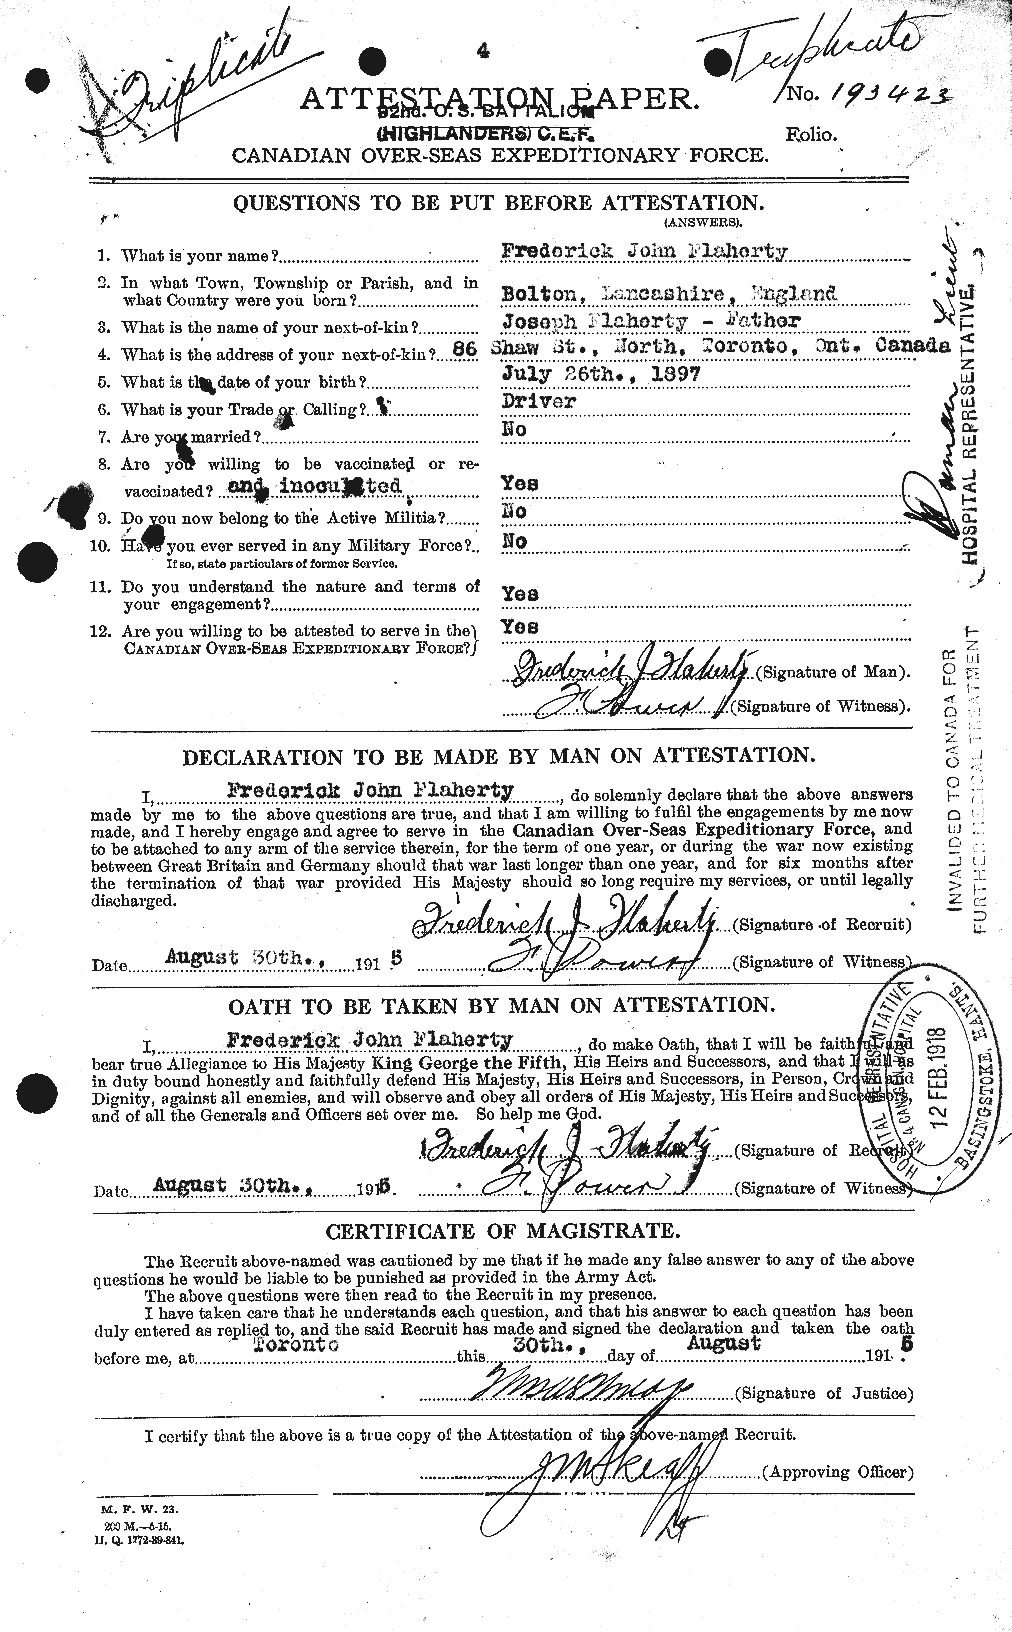 Personnel Records of the First World War - CEF 323357a